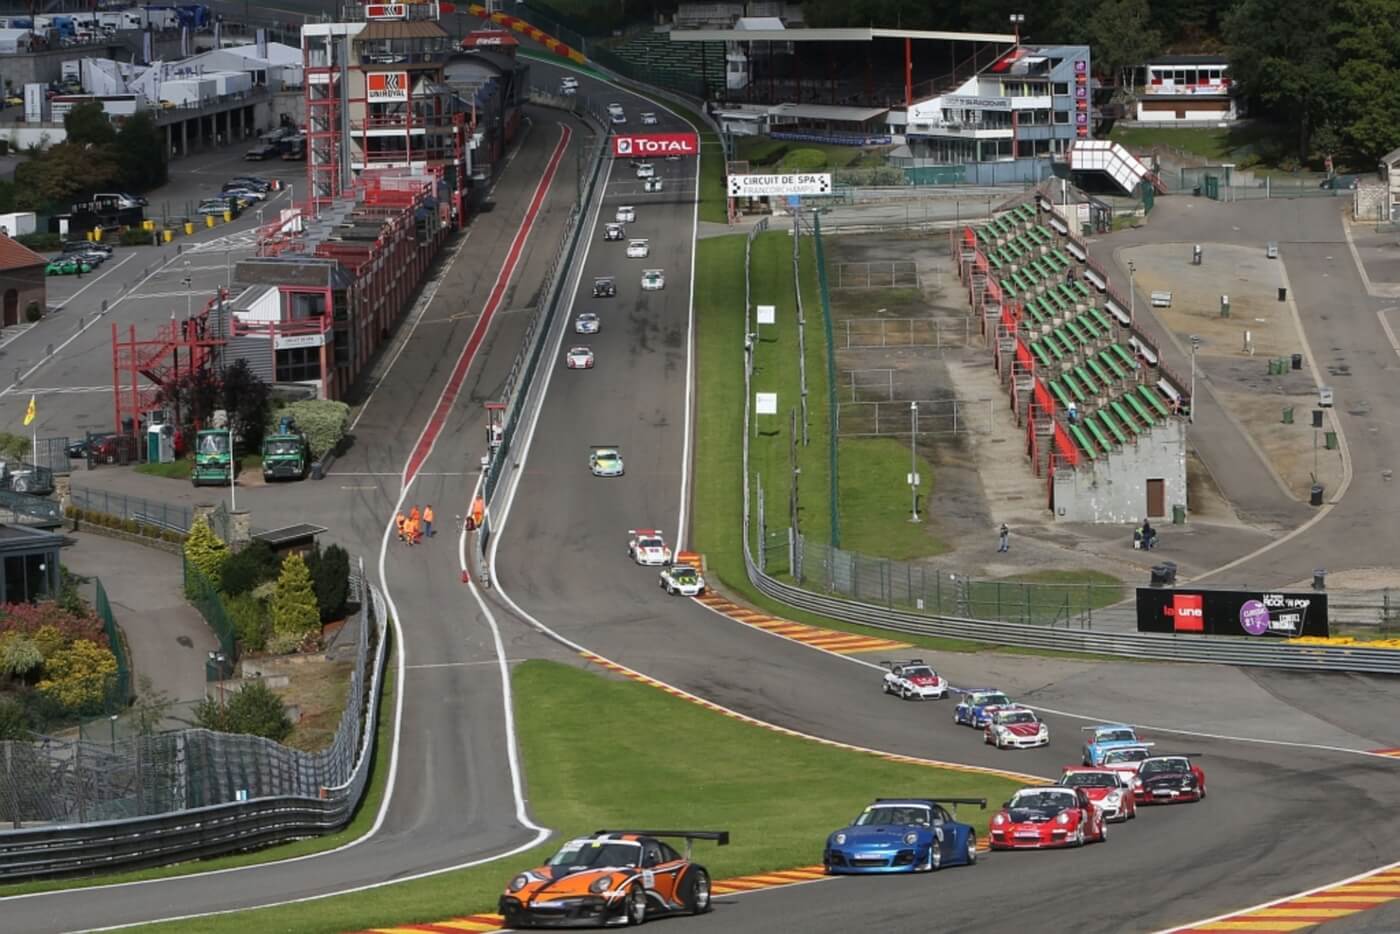 Porsche Sports Cup in Spa-Francorchamps